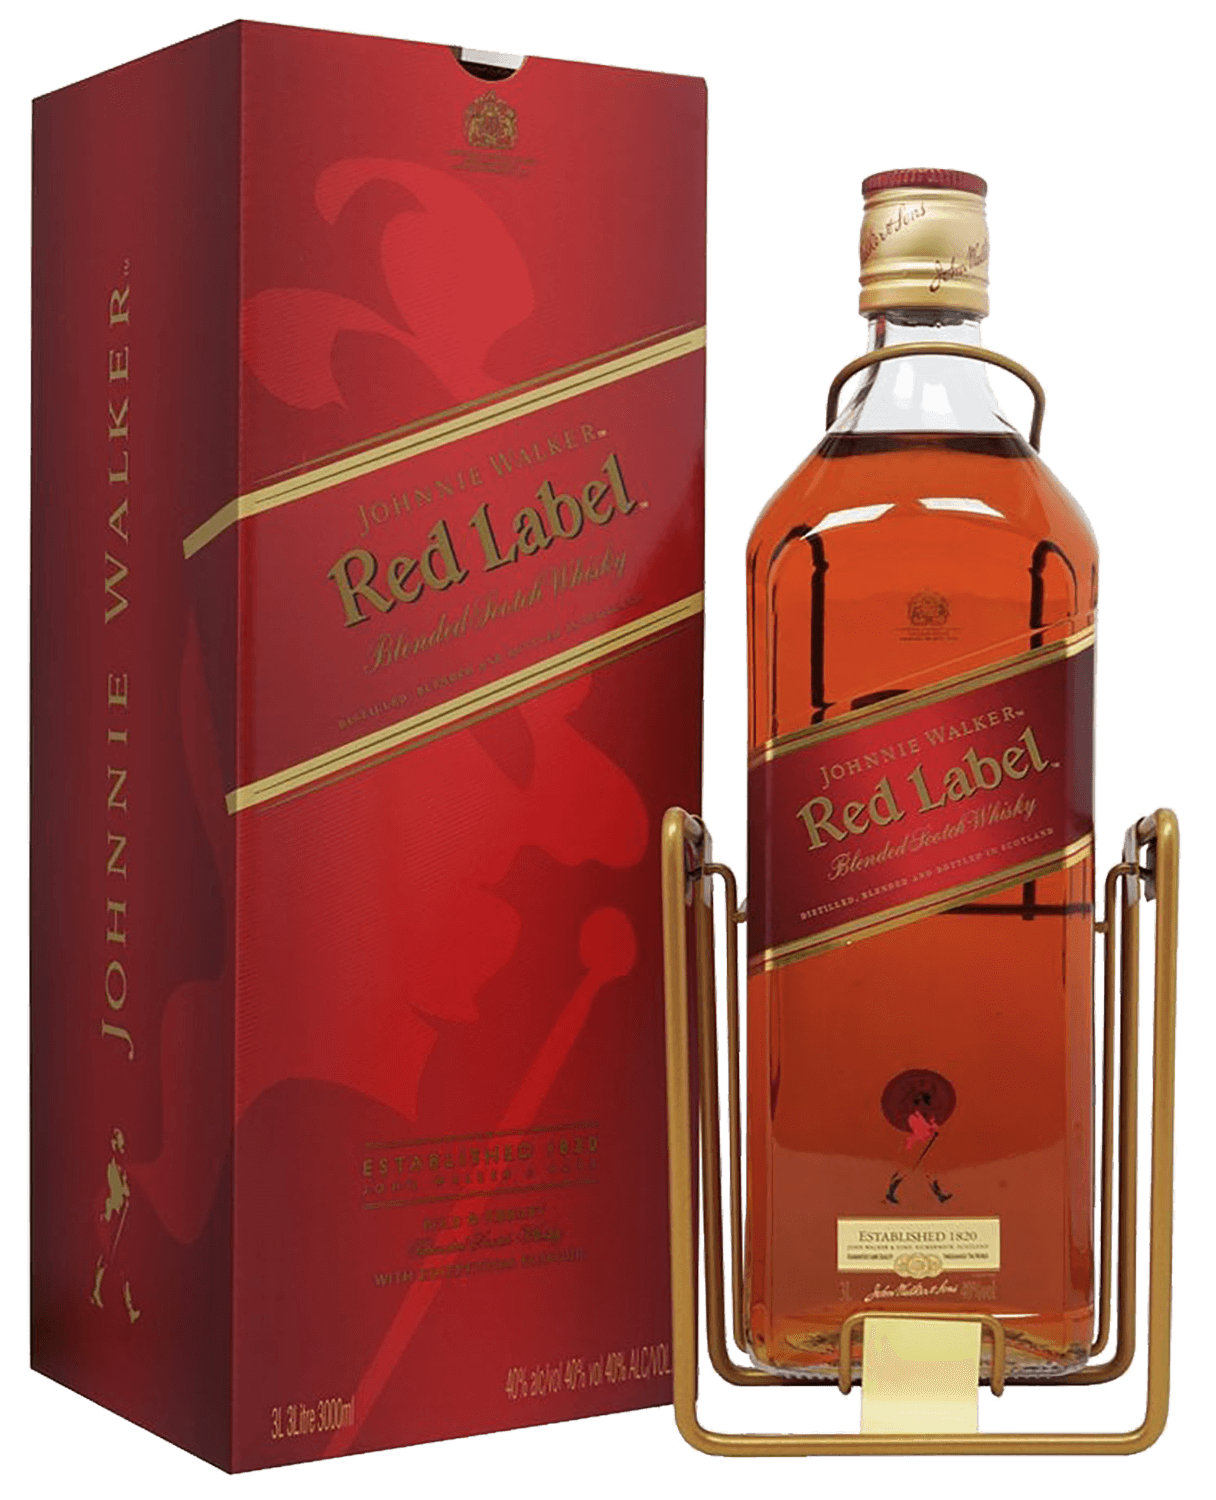 Johnnie Walker Red Label Blended Scotch Whisky (gift box) johnnie walker red label blended scotch whisky gift box with 1 glass